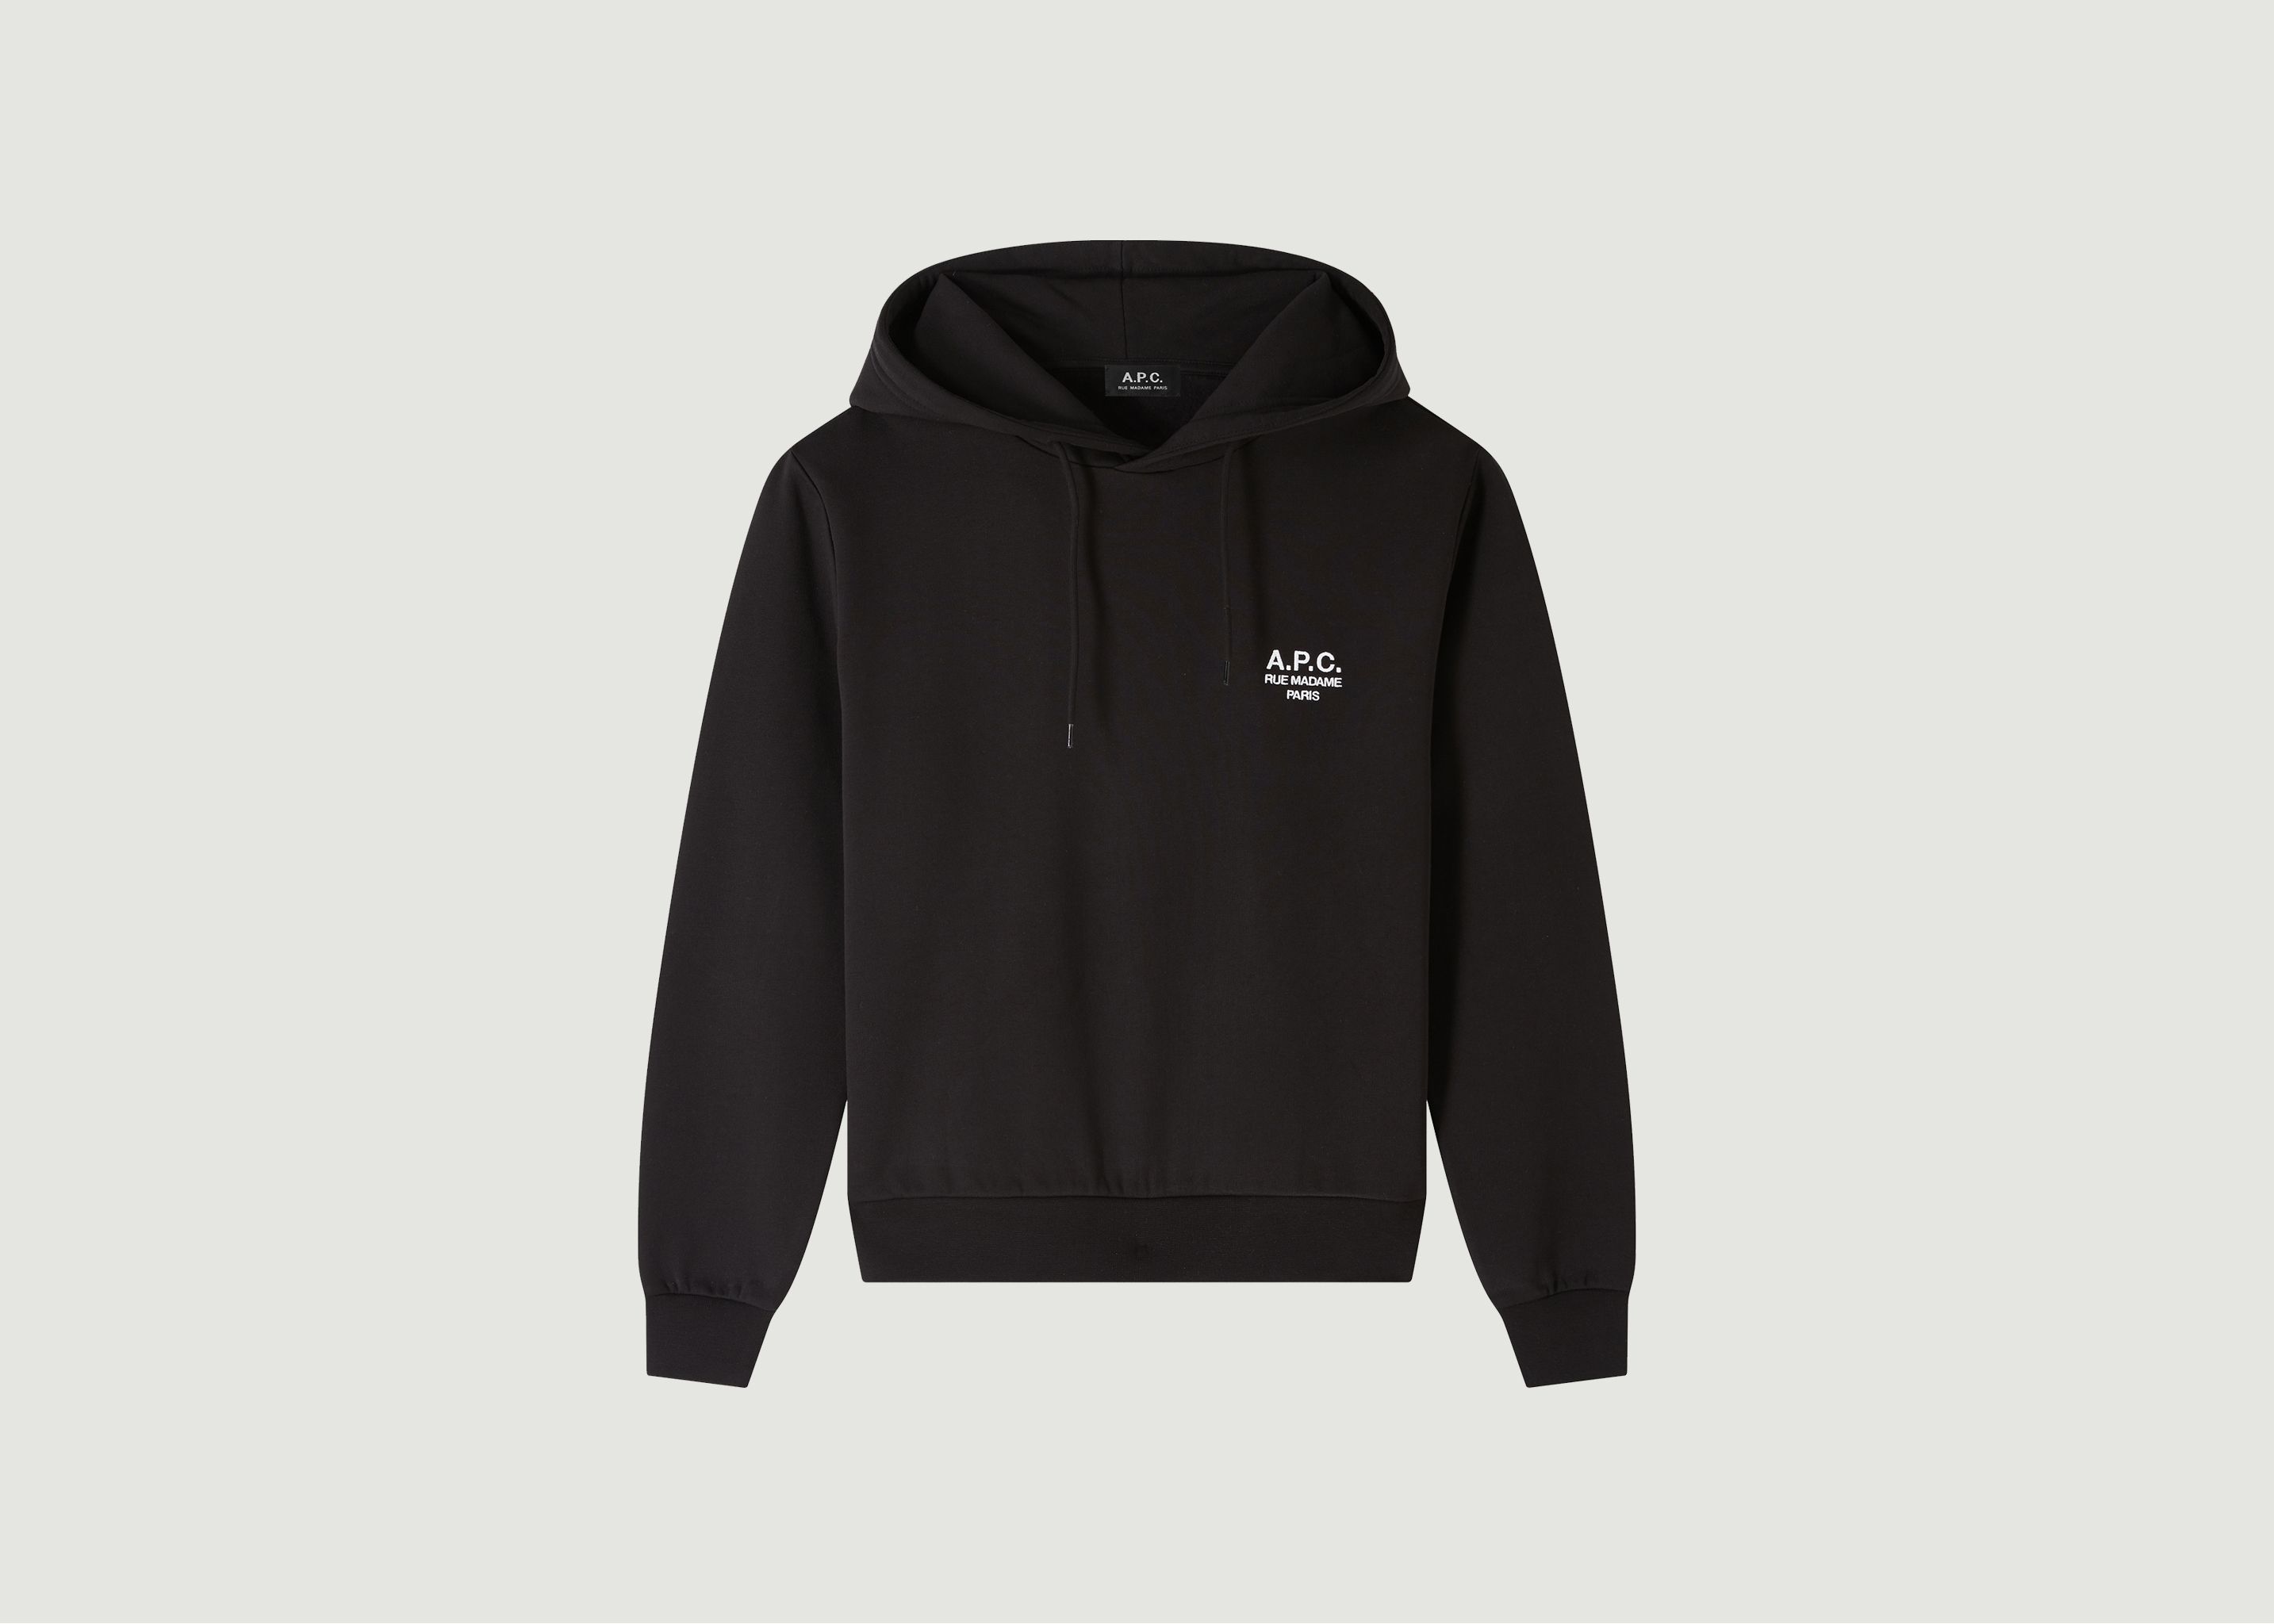 Hoodie with embroidered logo - A.P.C.